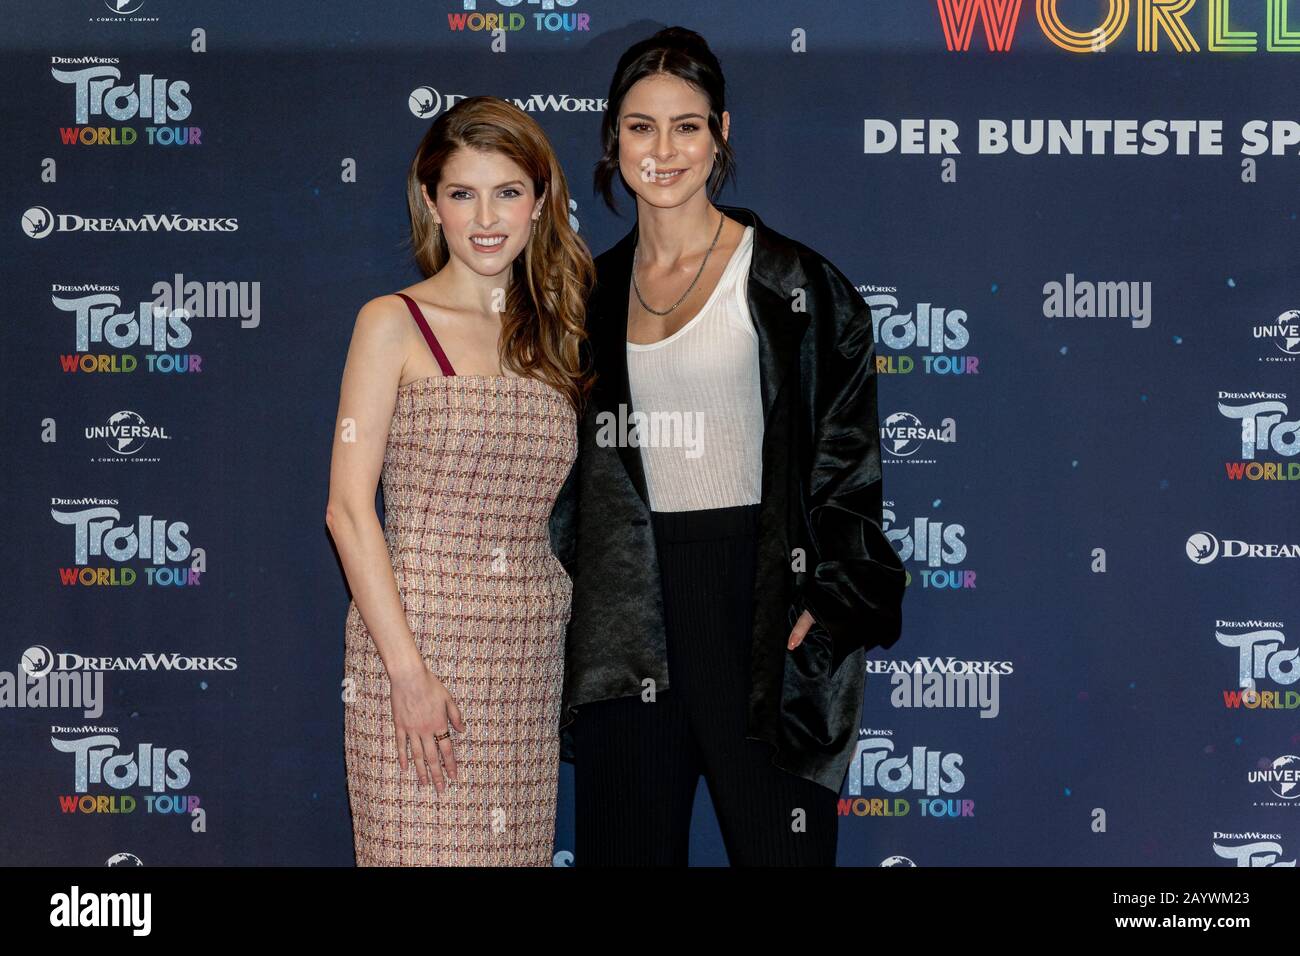 Berlin, Germany. 17th Feb, 2020. 17.02.2020, Anna Kendrick and Lena Meyer-Landrut at the photocall for the film Trolls World Tour at the Waldorf Astoria Hotel in Berlin. The new animated film from DreamWorks Animation, distributed by Universal Pictures International Germany, will be launched nationwide on April 23, 2020 in German cinemas. | usage worldwide Credit: dpa picture alliance/Alamy Live News Stock Photo